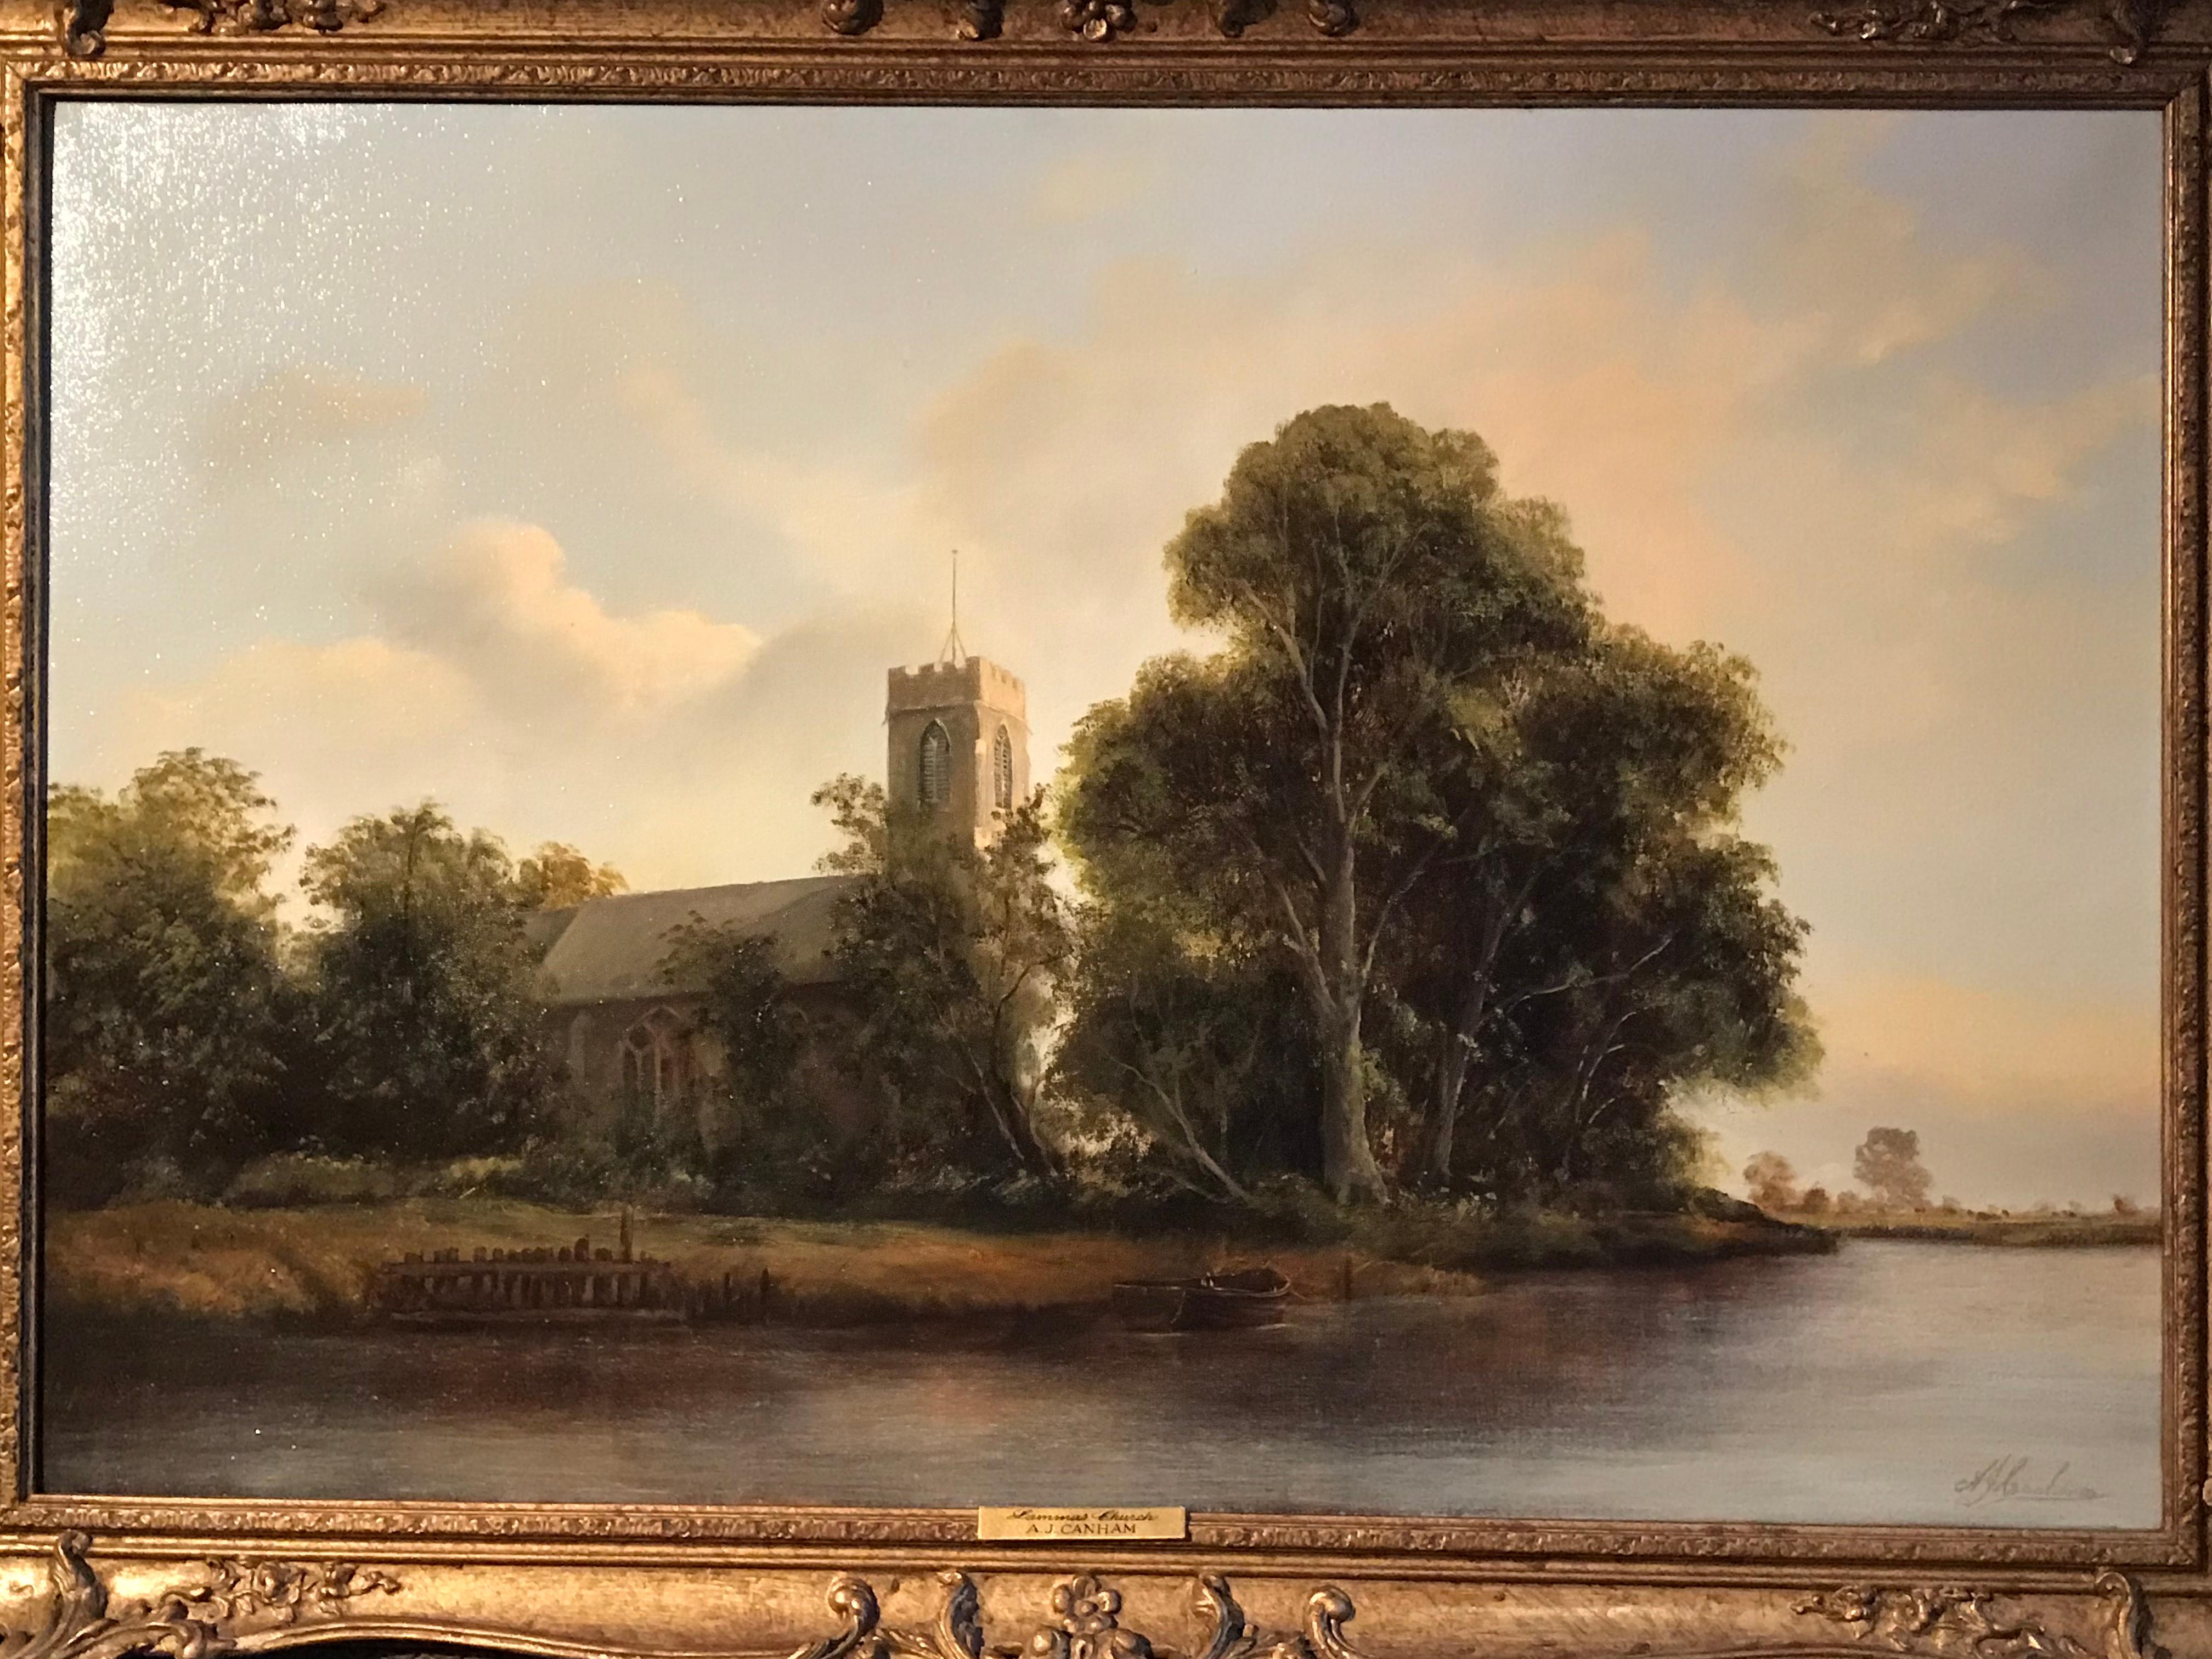 Large Tranquil Norfolk River Landscape & Anglo Saxon Church, English Oil Painting - Brown Landscape Painting by A. J. Canham